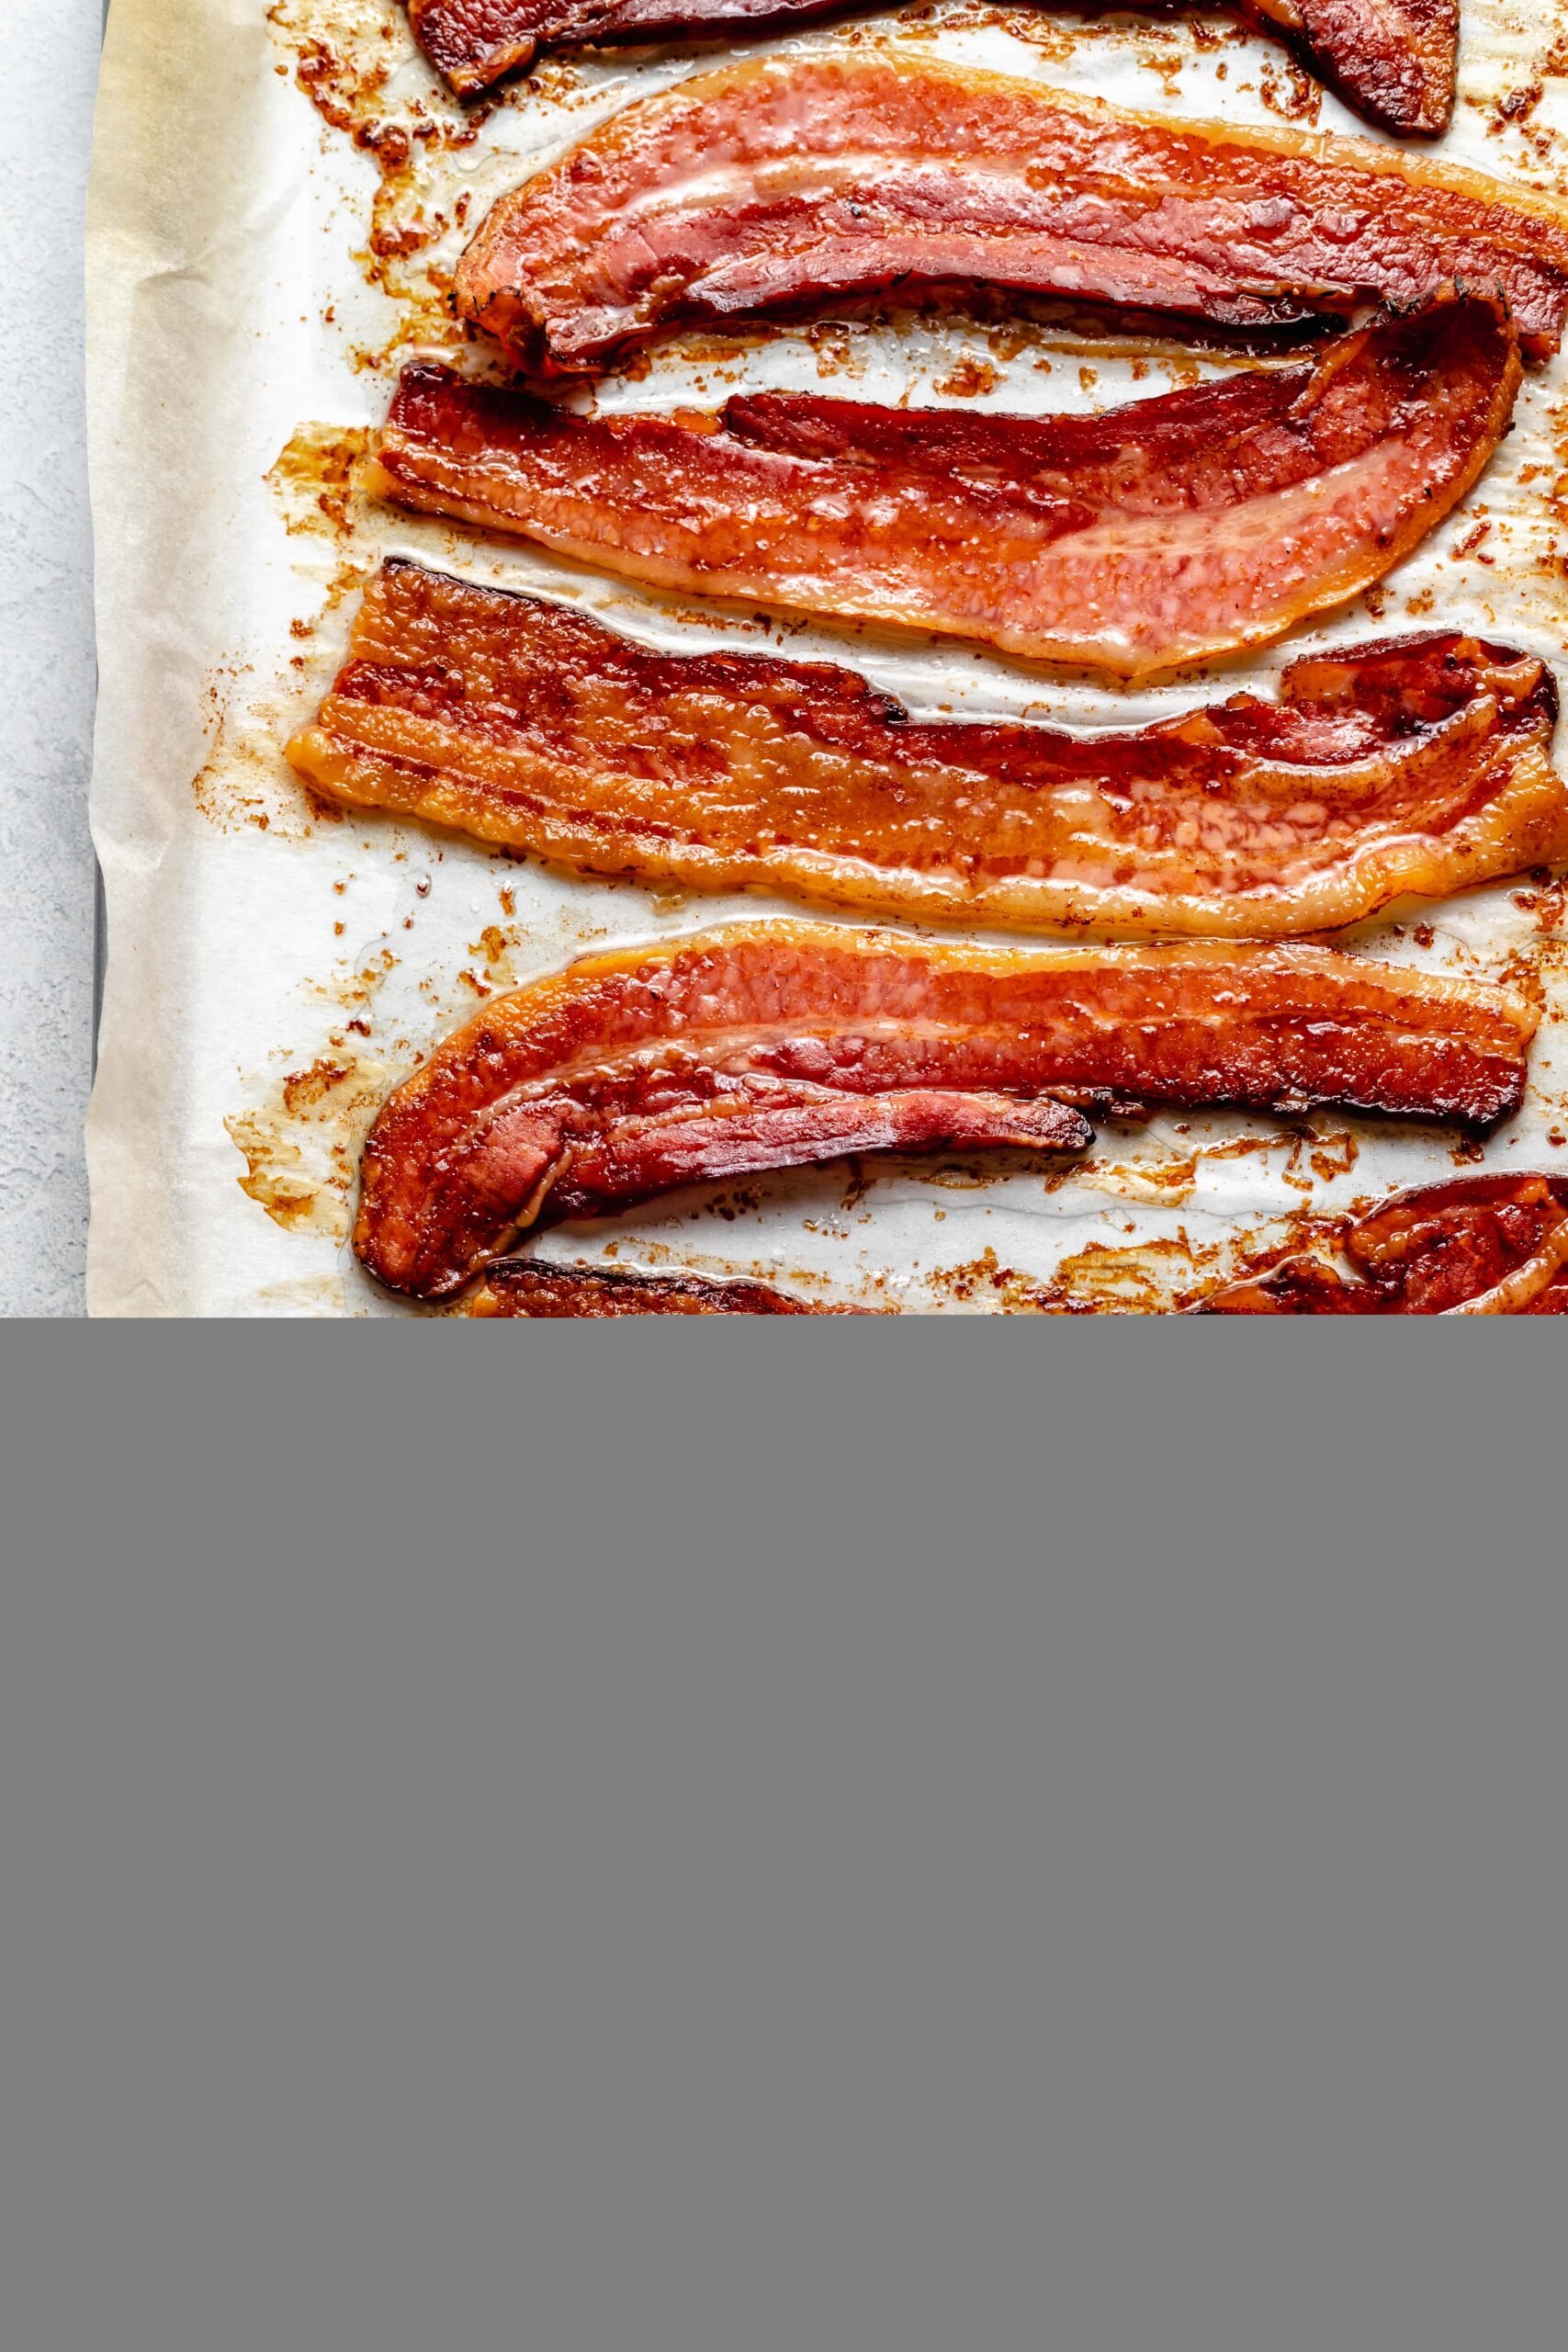 Cooking Bacon to Perfection  How to Cook Bacon on the Stovetop